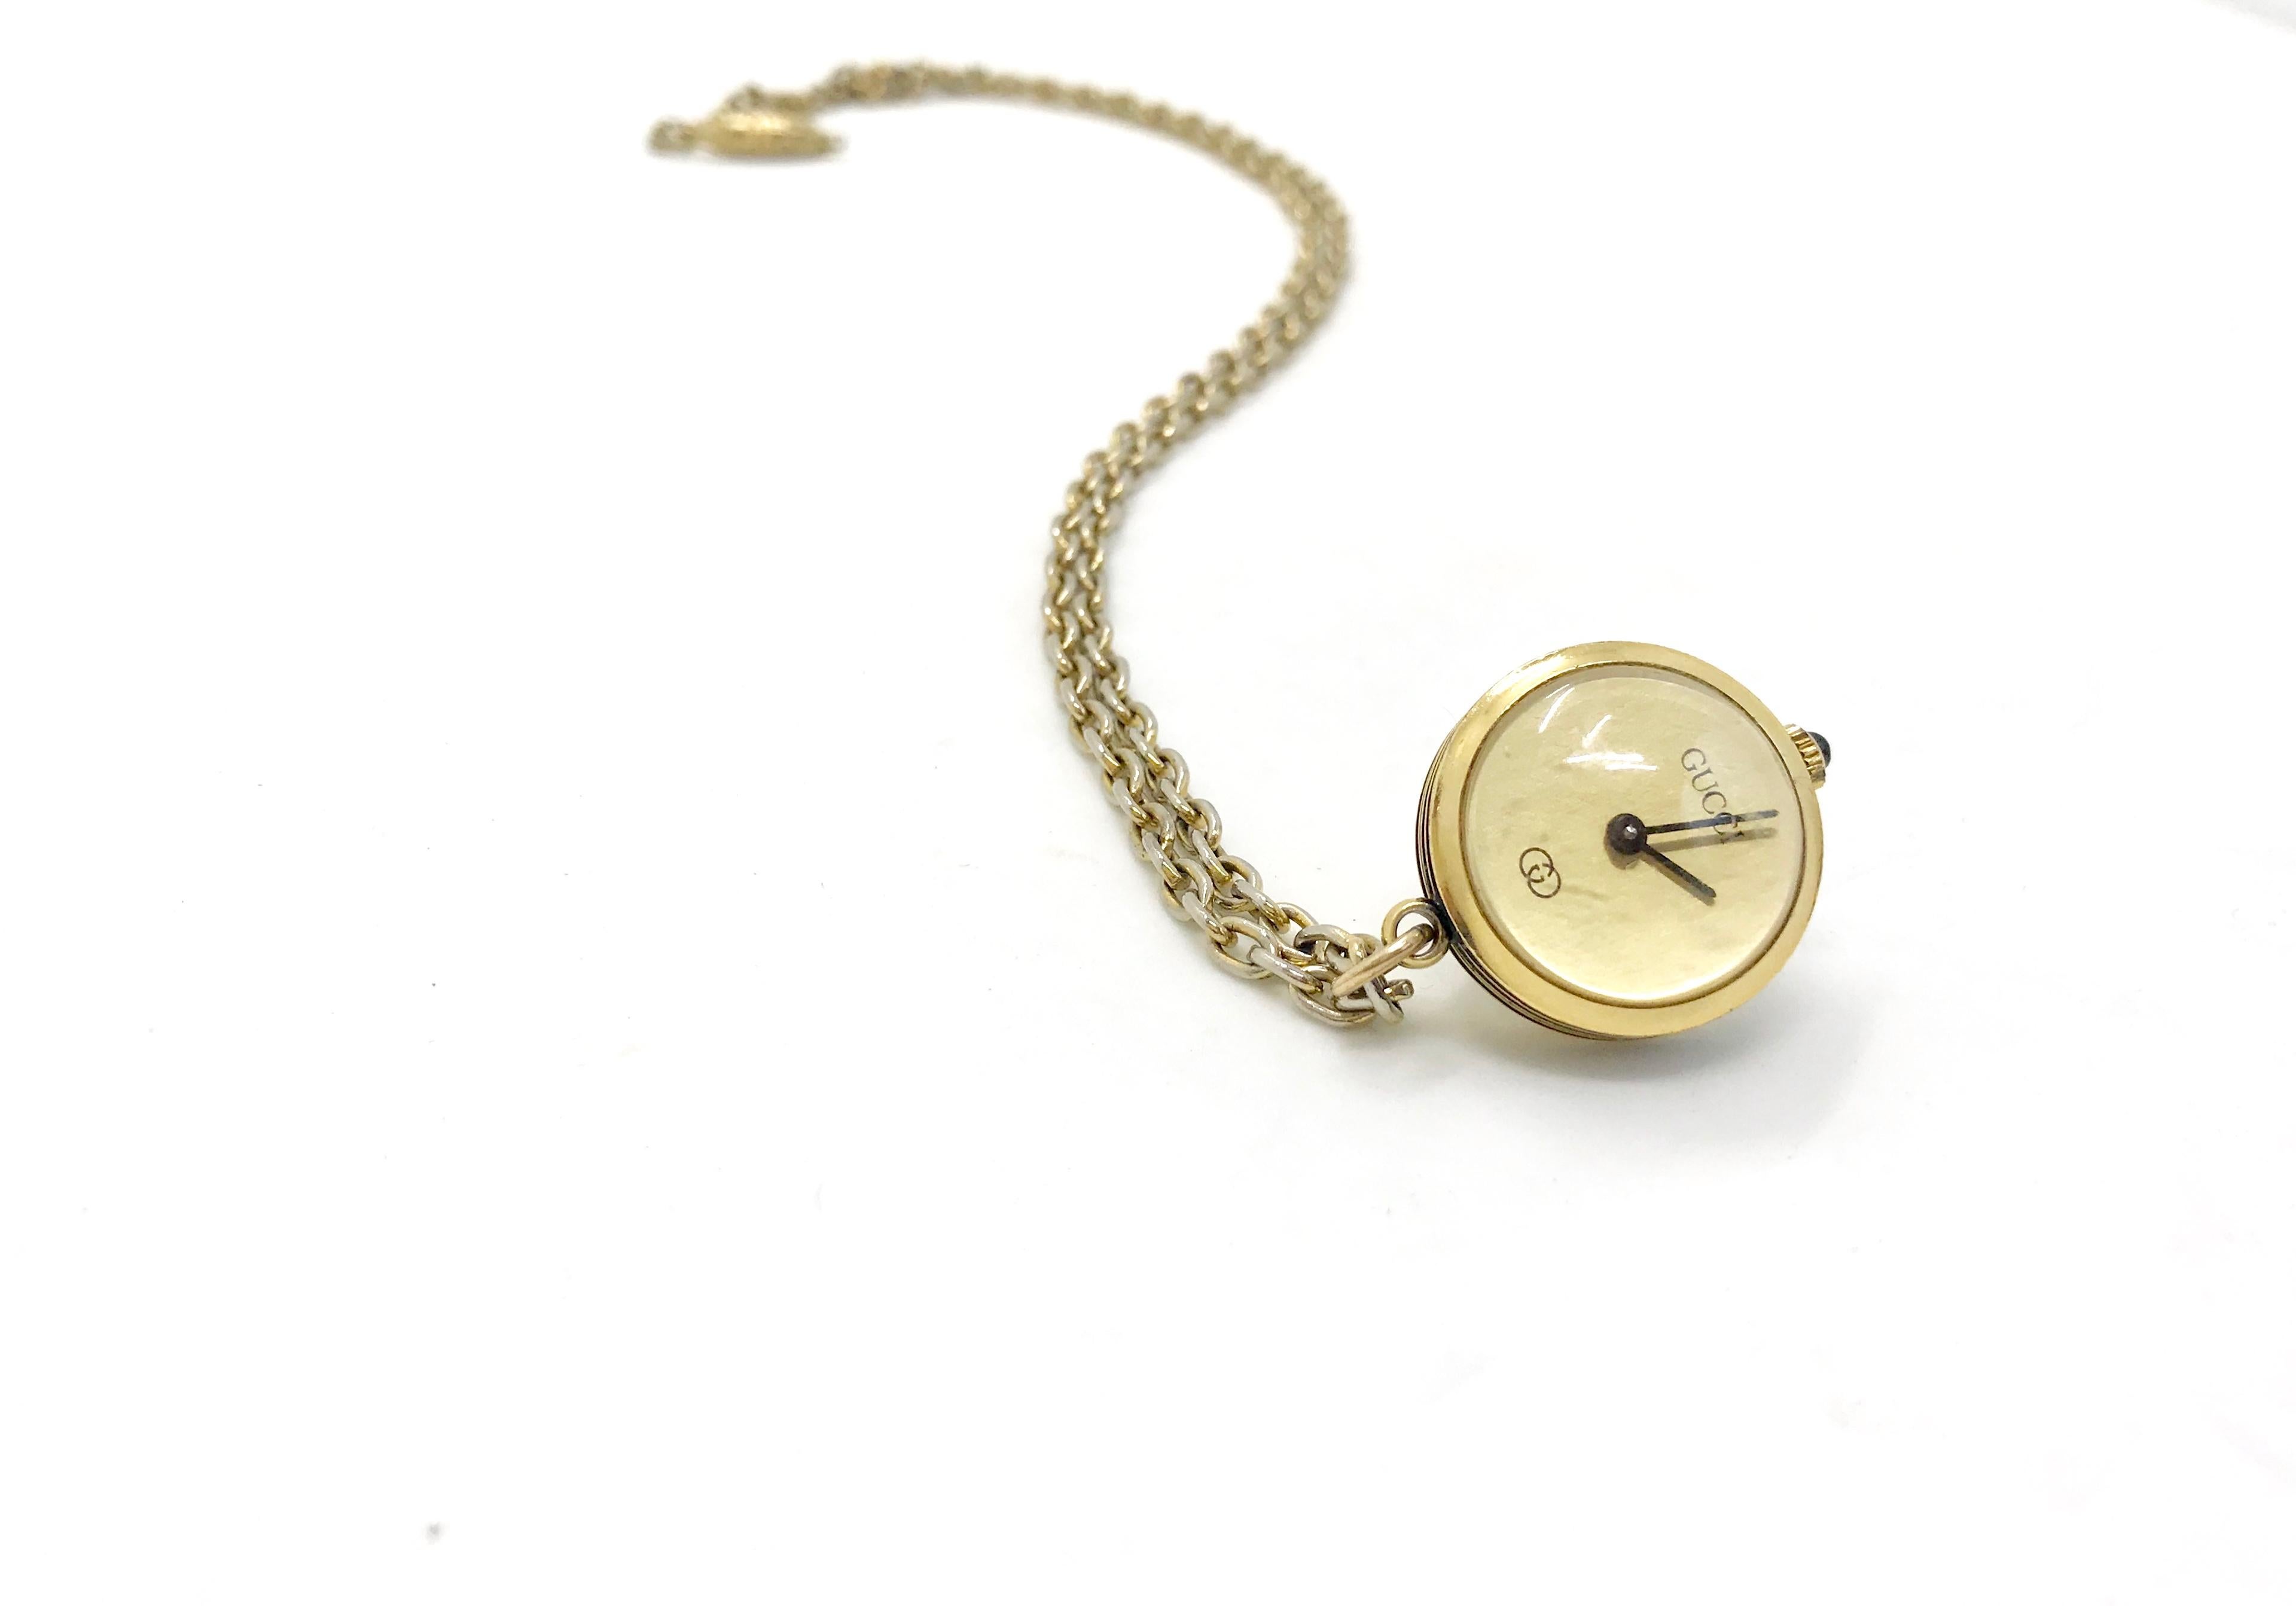 Vintage 1970s Gucci watch pendant.  Rare and iconic Gucci piece. 

Measuring around 3/4